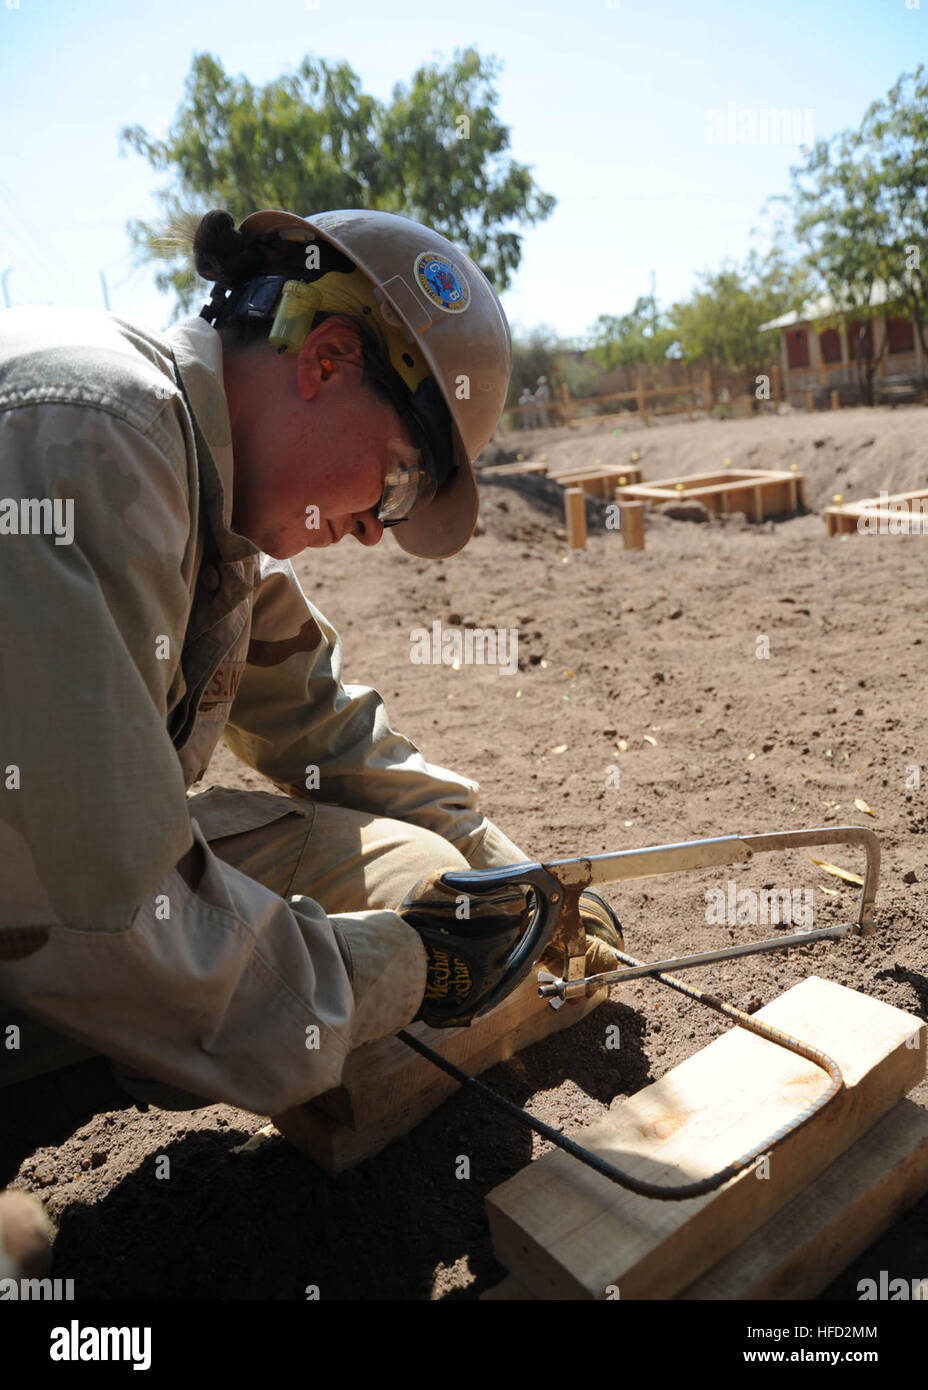 Seaman 3rd Class Danielle Lang, assigned to Naval Mobile Construction Battalion NMCB 74 Detail Horn of Africa (Det. HOA), cuts steel rebar with a saw at a schoolhouse construction project in Dire Dawa, Ethiopia. NMCB 74 Det. HOA is deployed to Combined Joint Task Force-Horn of Africa to assist in building host nation partnerships and promoting regional stability by constructing schools, medical clinics, water wells and more throughout the region. Seabees Build Futures in Ethiopia 360209 Stock Photo